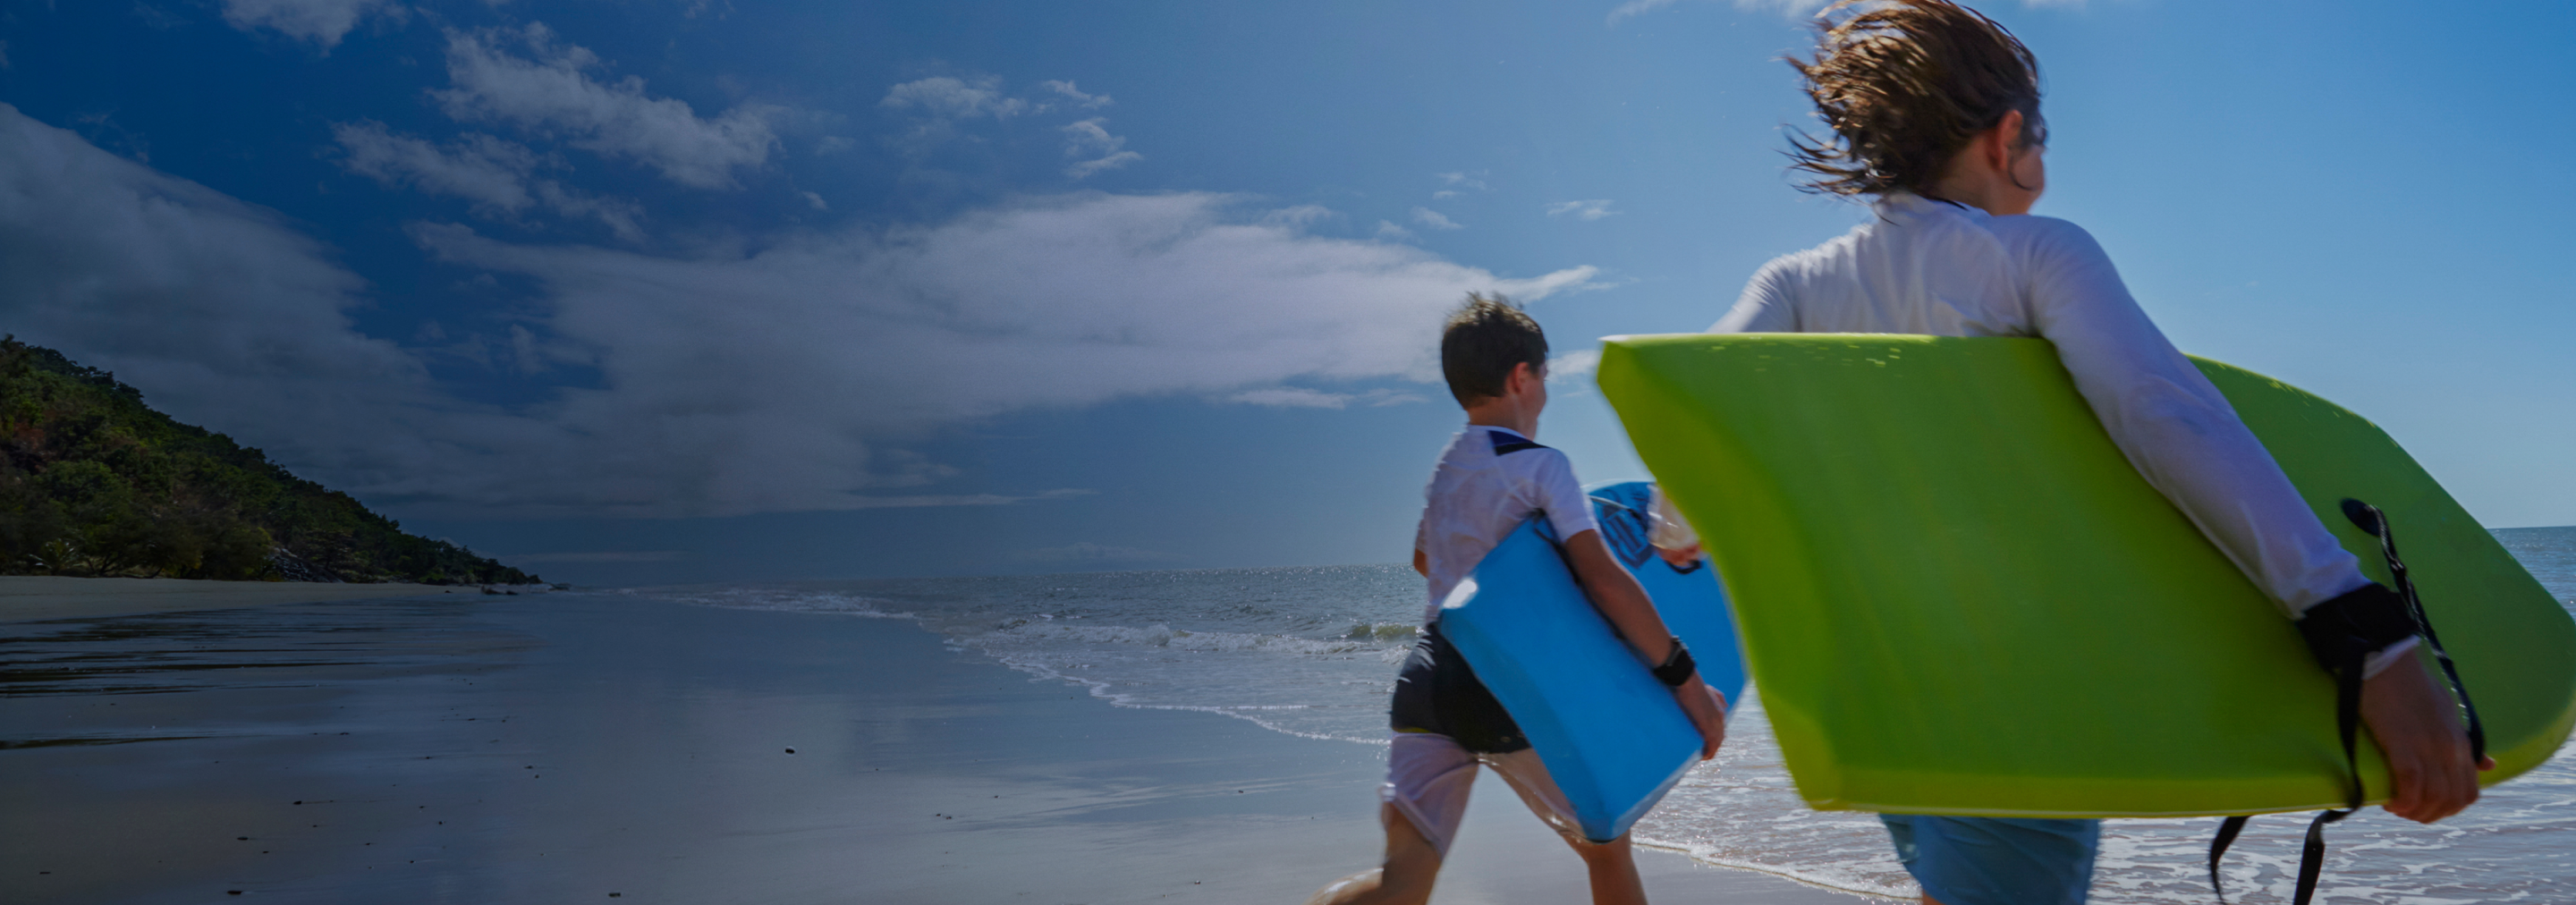 Two young children on a beach running towards the water with bodyboards